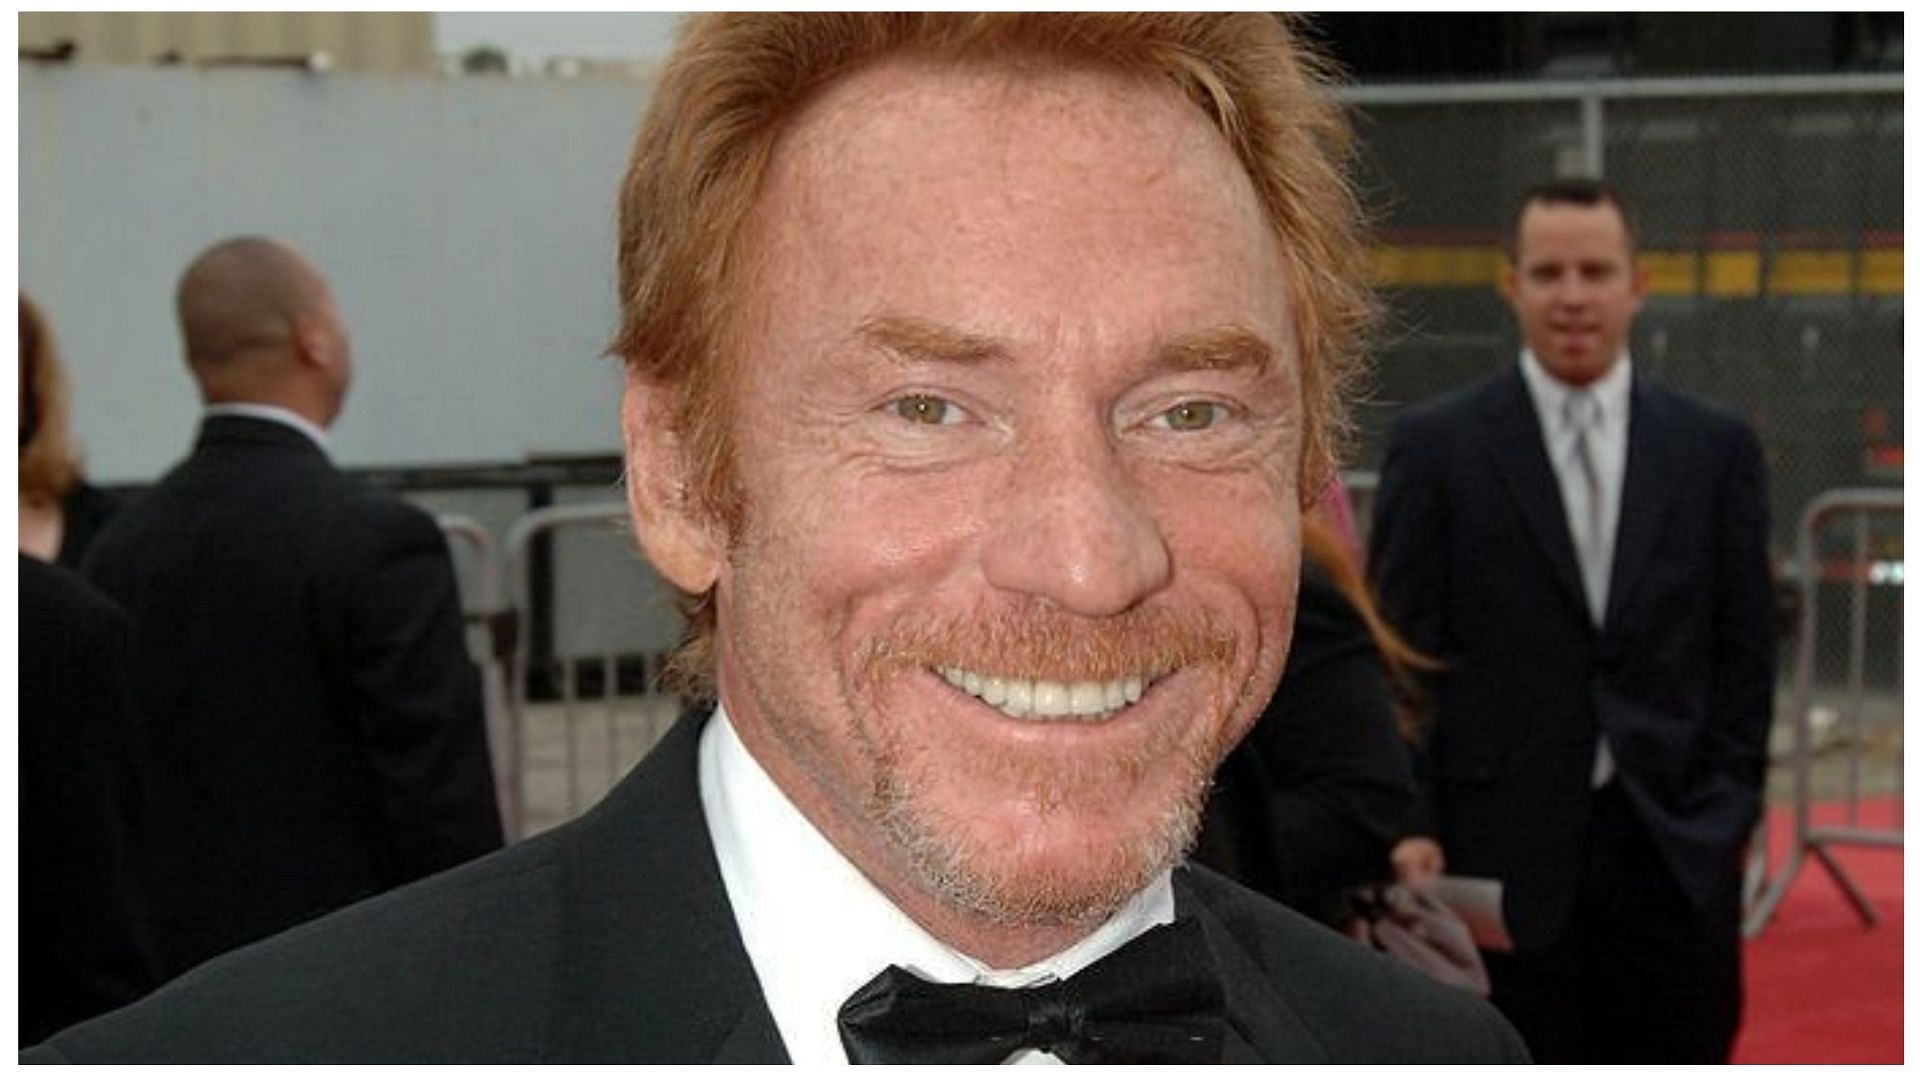 Danny Bonaduce became popular after his appearance on The Partridge Show (Image via Jeff Kravitz/Getty Images)